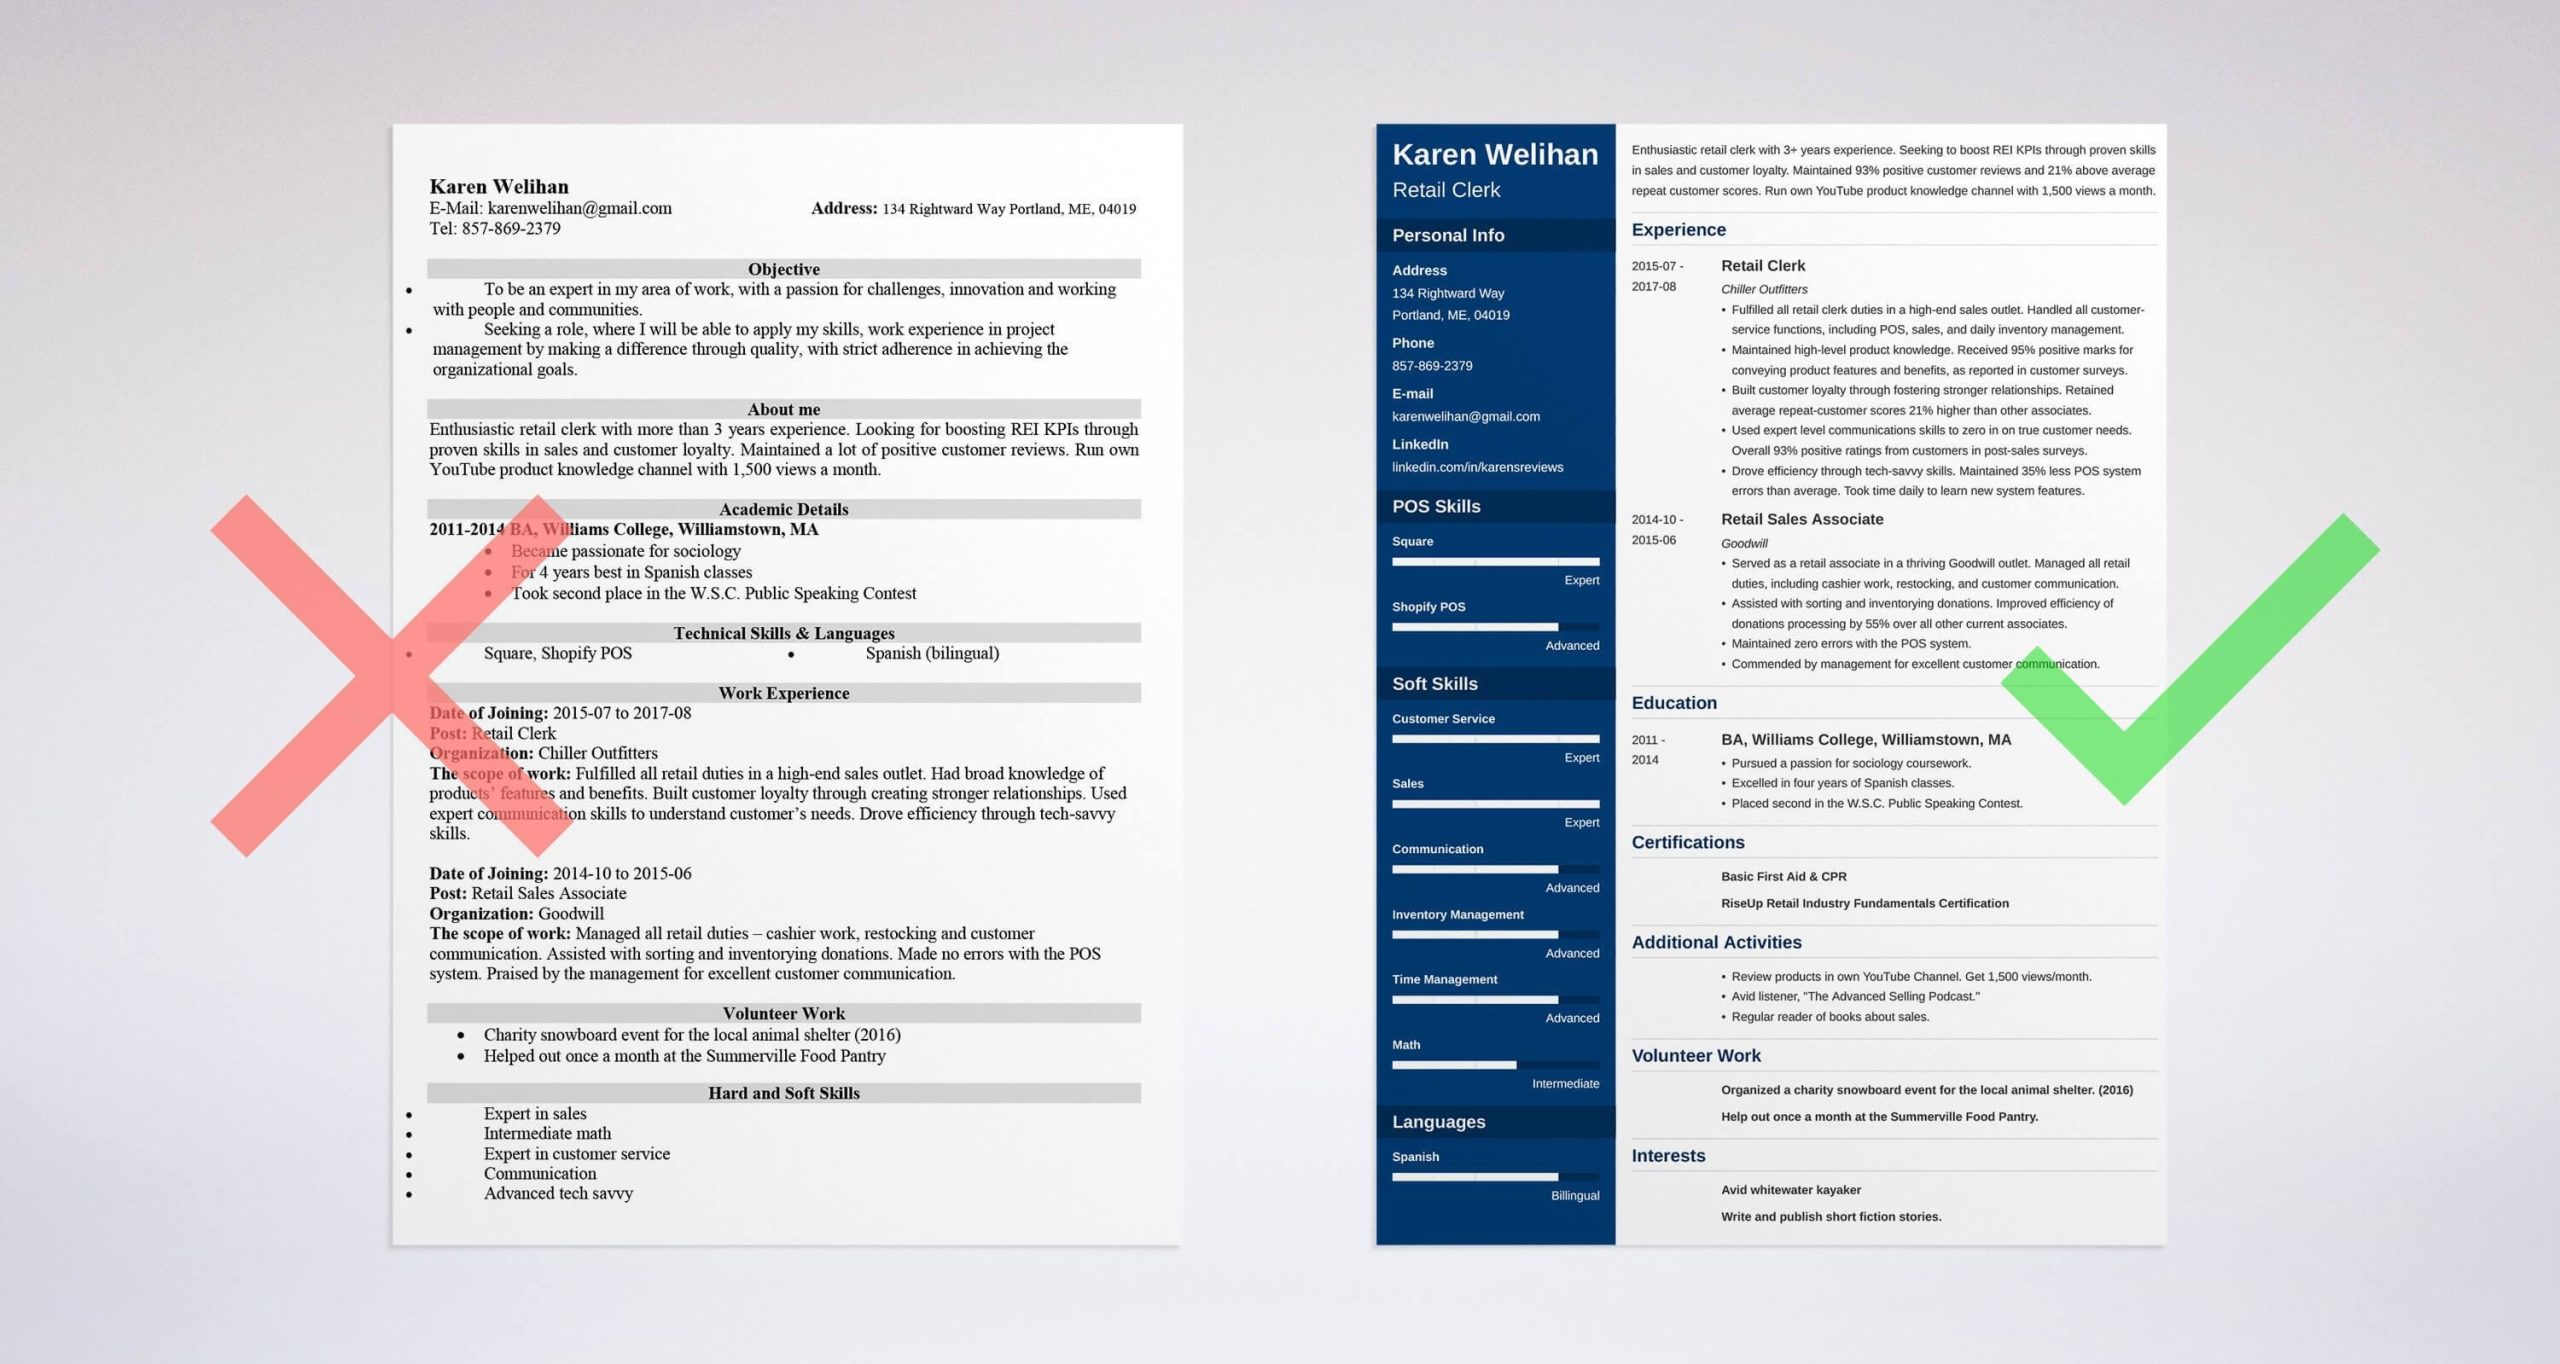 Resume Sample for Convenience Store Manager Retail Resume Examples (with Skills & Experience)